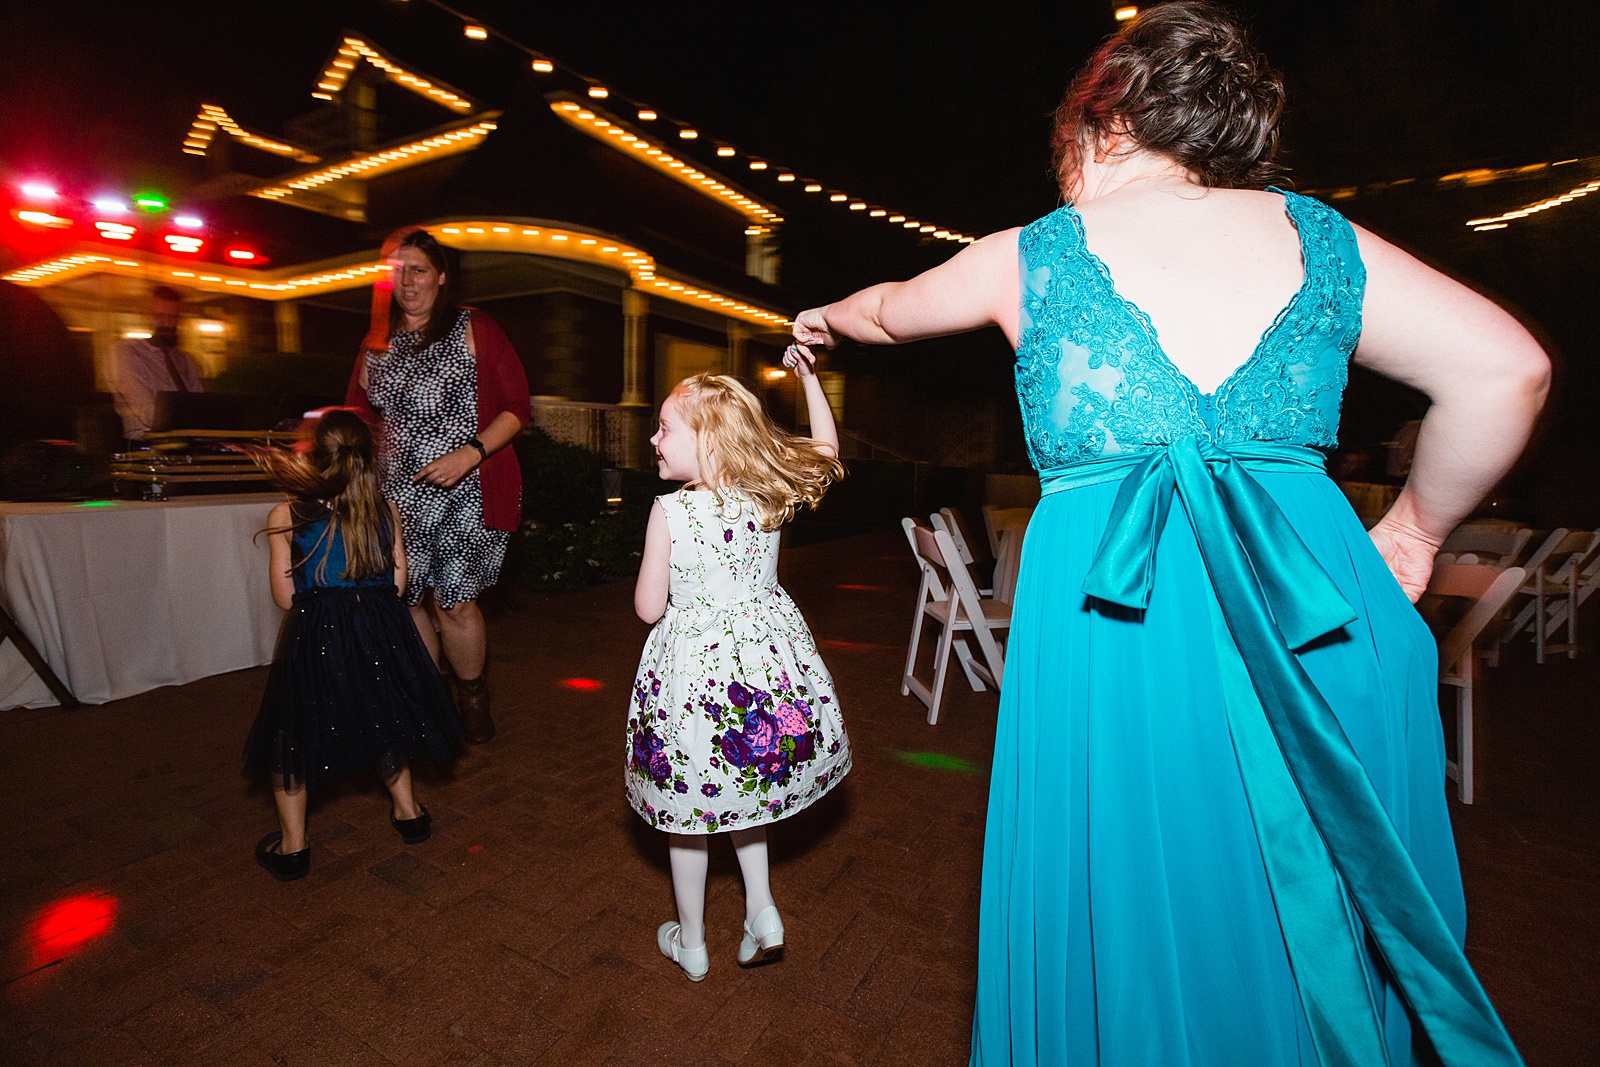 Guests dancing together at Stonebridge Manor wedding reception by Mesa wedding photographer PMA Photography